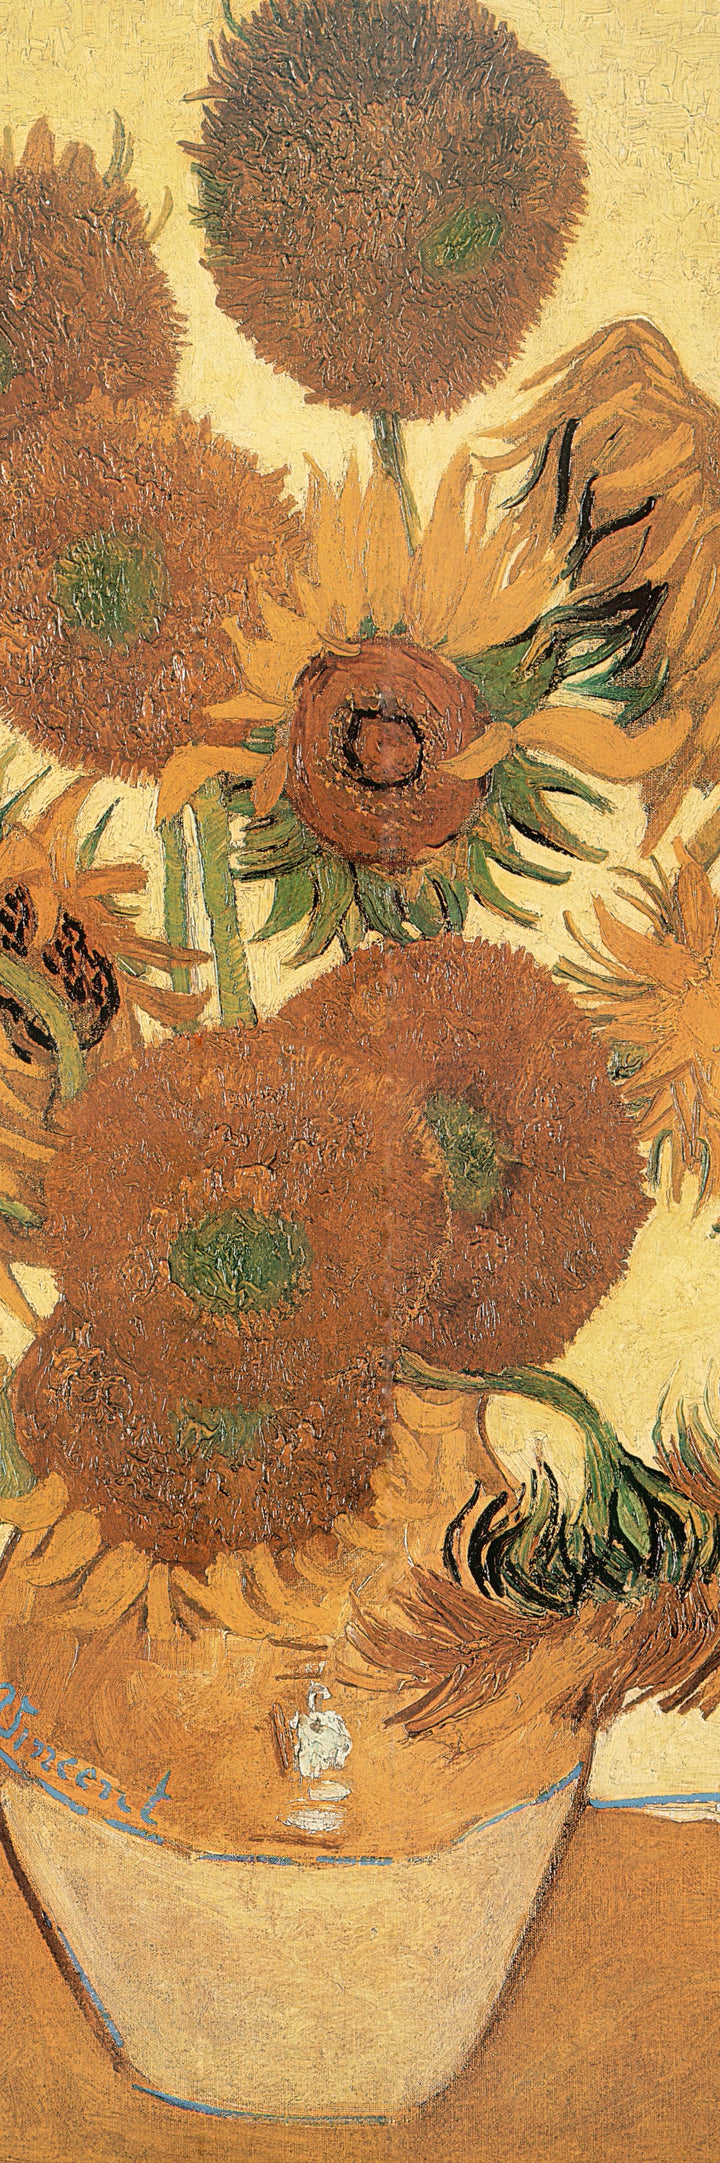 Still life with Sunflowers , 1889 by Vincent Van Gogh - 13 X 38 Inches (Art Print)